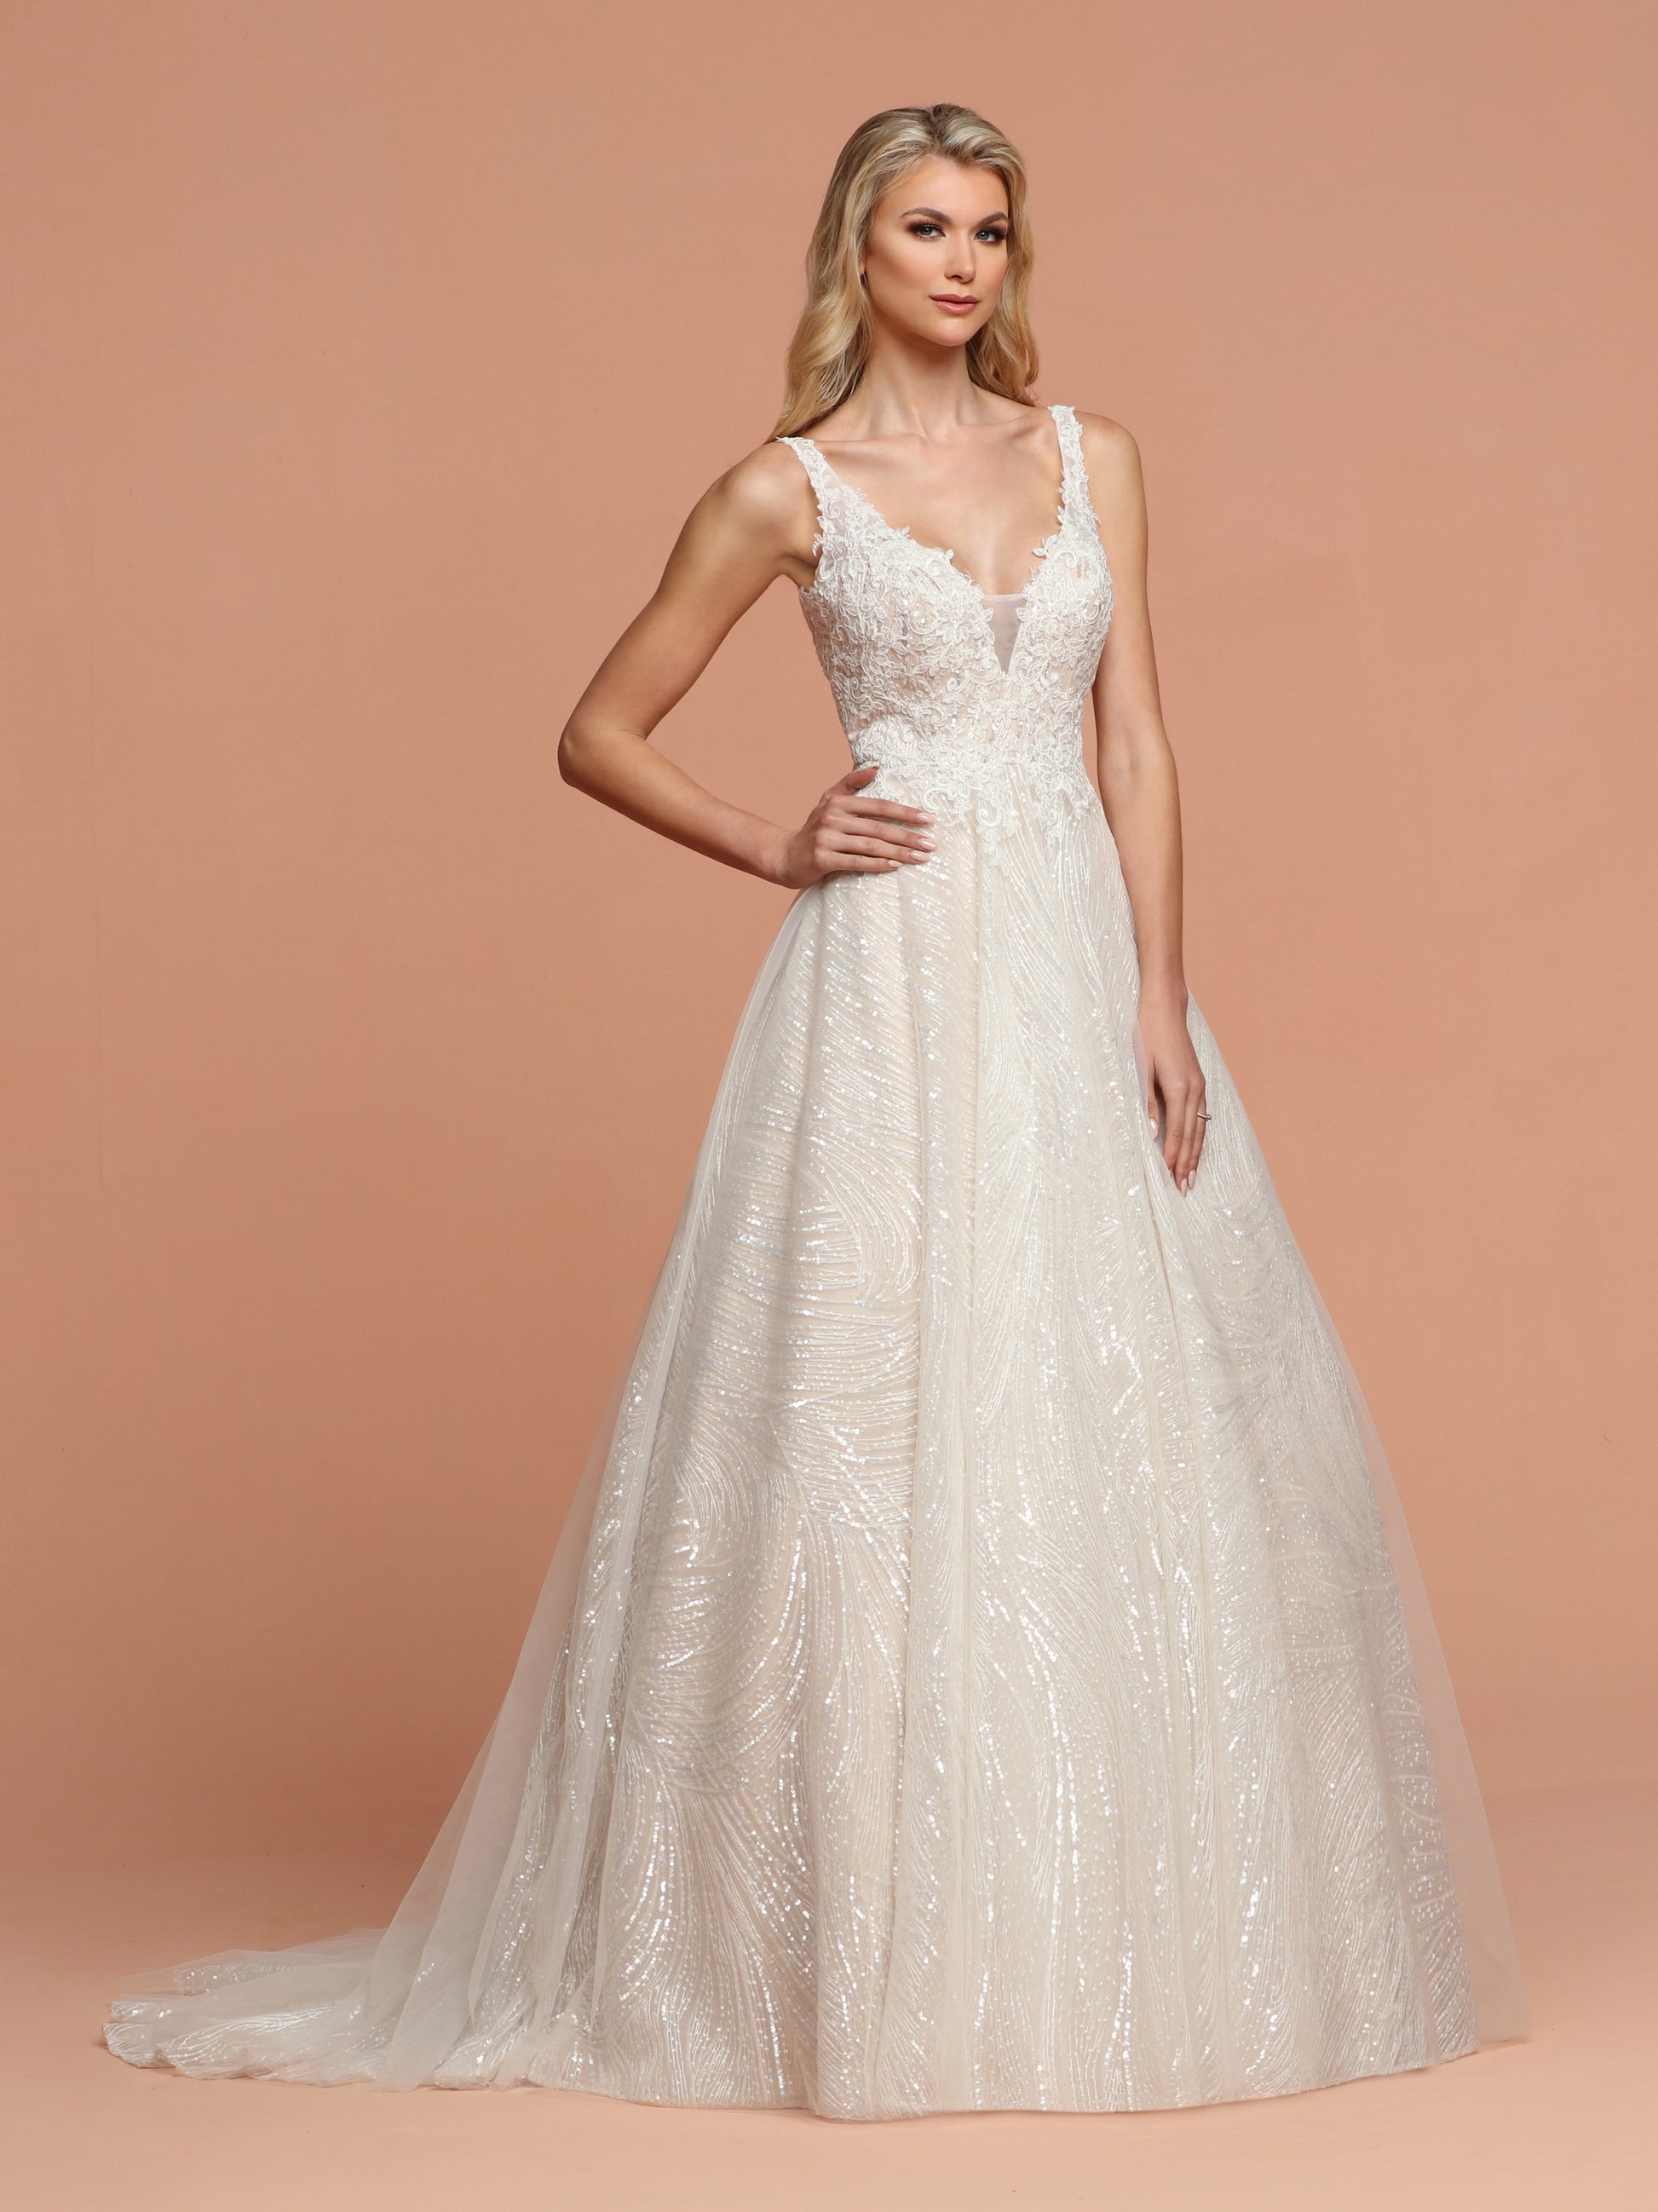 Davinci Bridal 50591 is a Ballgown Bridal Gown Featuring a Full Embellished Tulle Skirt for a stunning Shimmer on your Big Day! The Bodice features a V Neck with a mesh insert and an open V beck. Embellished Lace Bodice with straps.  Available for 1-2 Week Delivery!!!  Available Sizes: 2,4,6,8,10,12,14,16,18,20  Available Colors: Ivory/Nude, Ivory/Ivory  Available Colors: Ivory/Nude, Ivory/Ivory